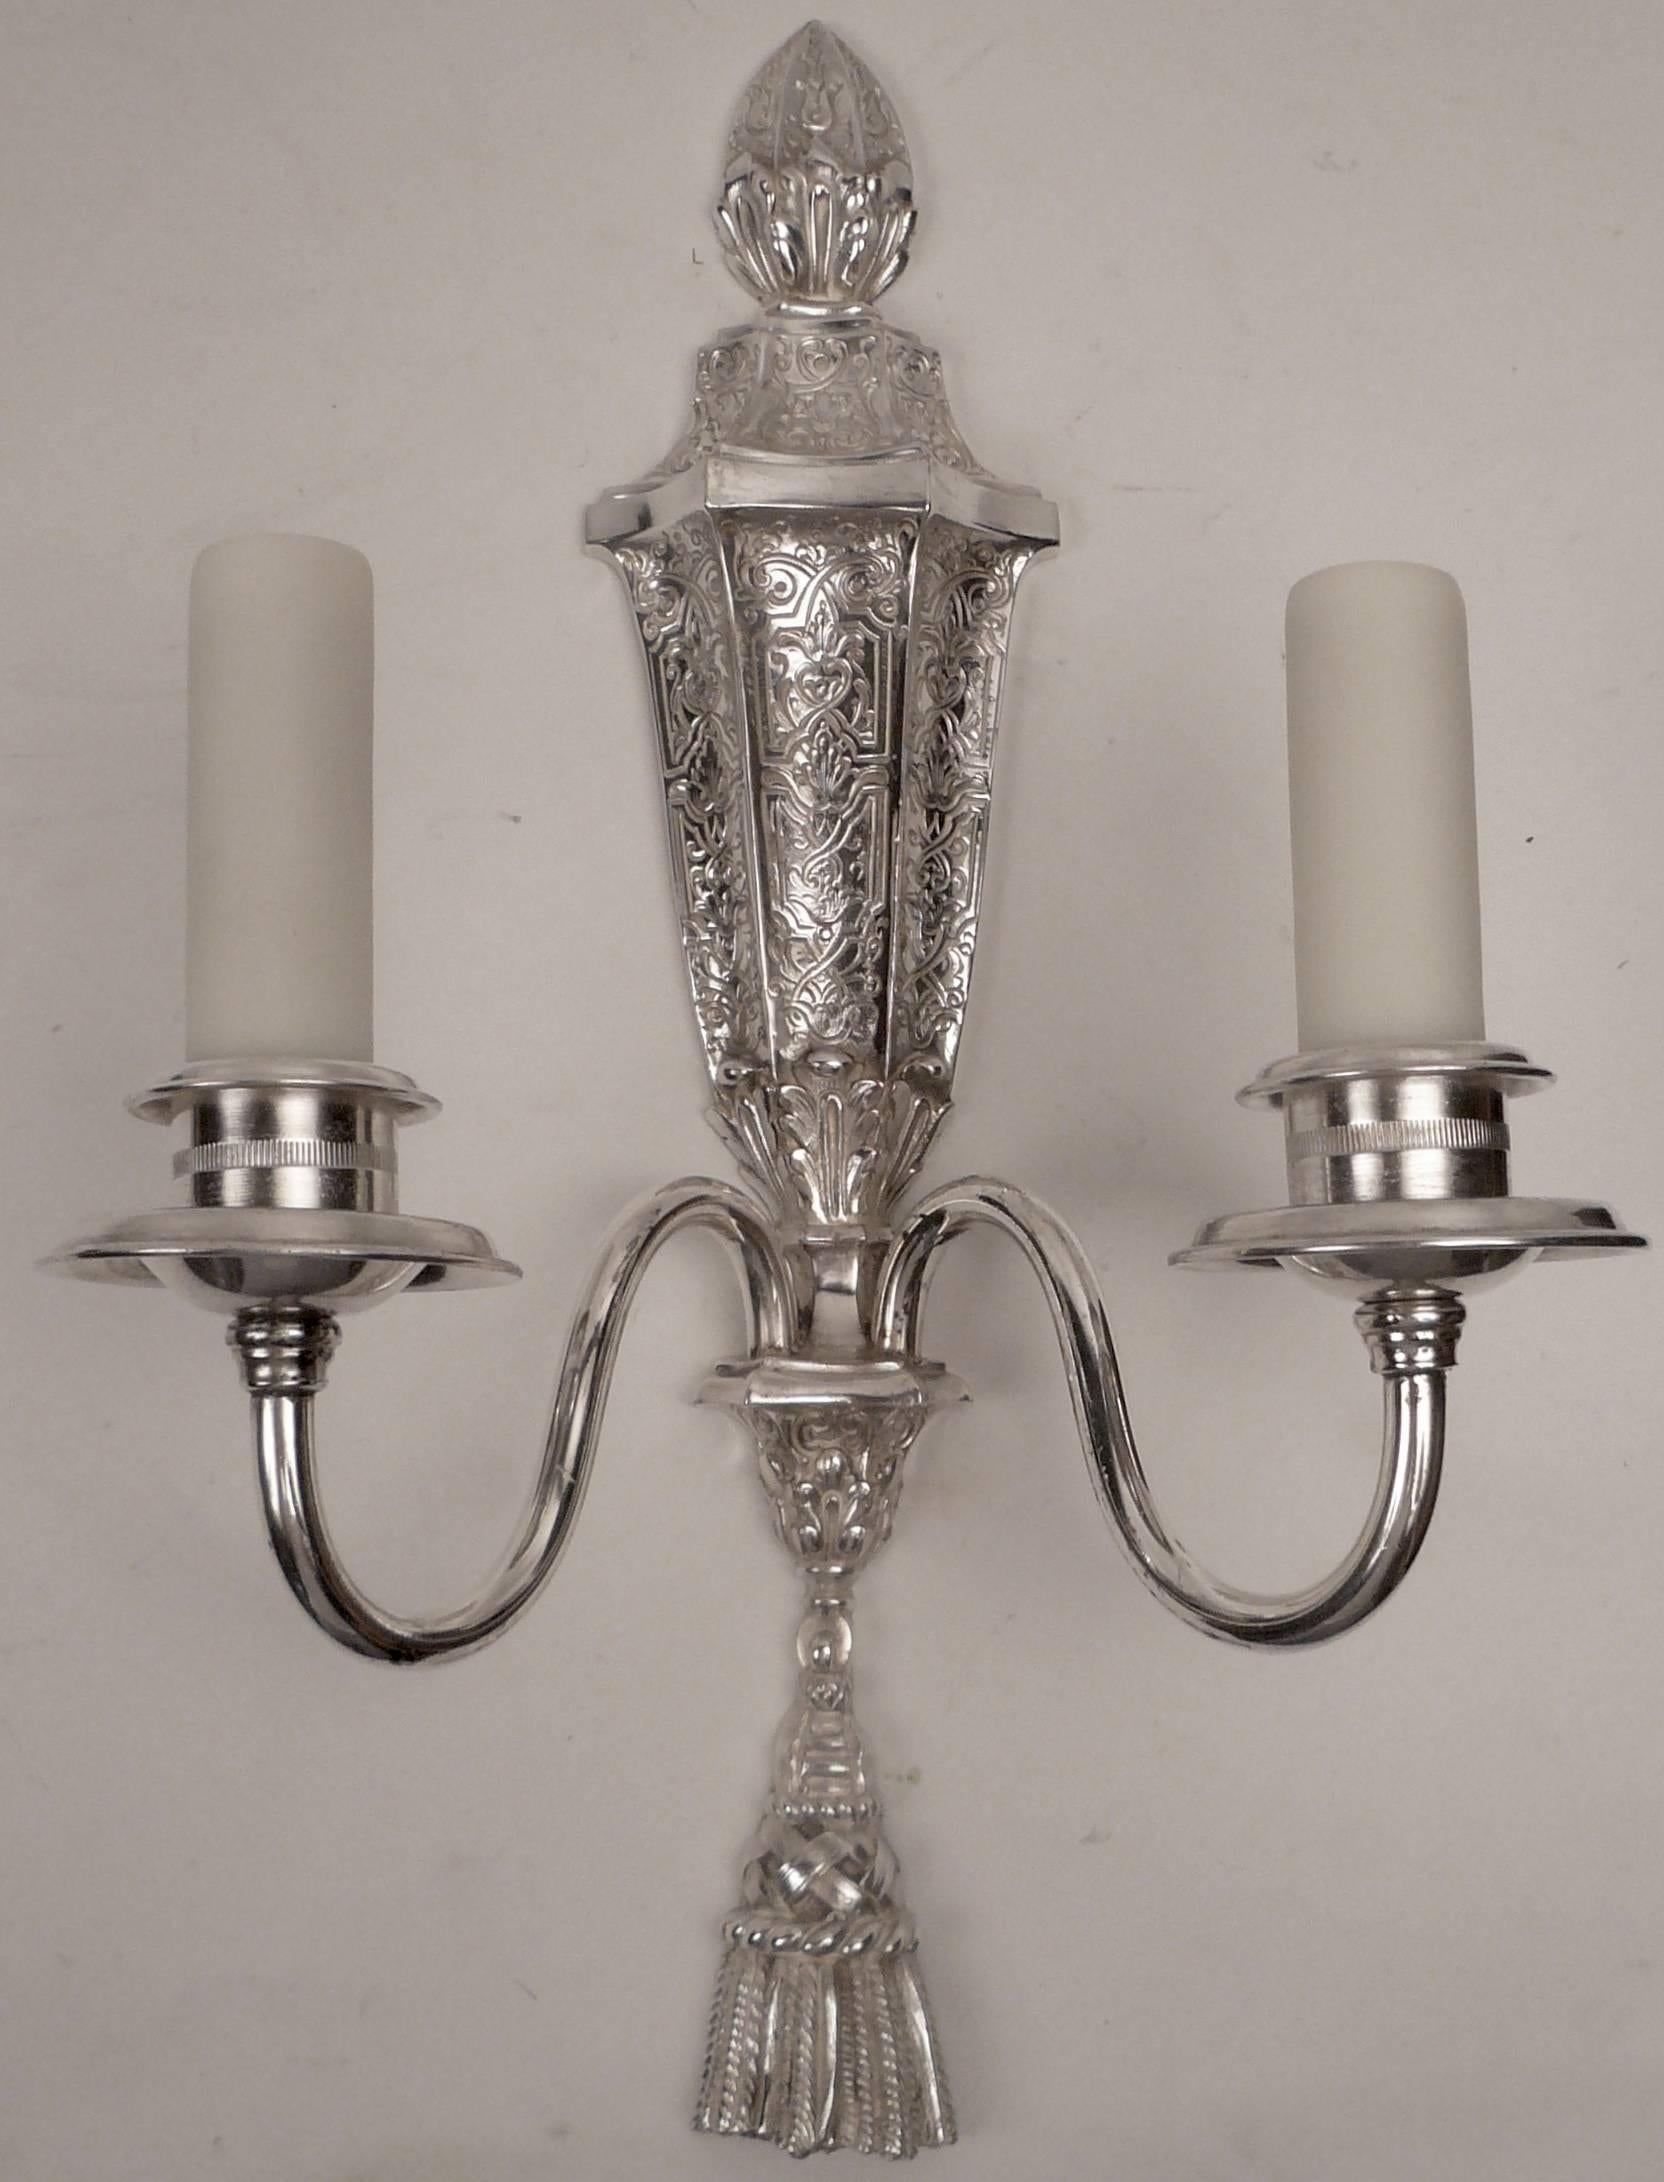 This beautiful set of six twin light sconces are in the early Georgian style.
They are hand chased, and finely detailed.